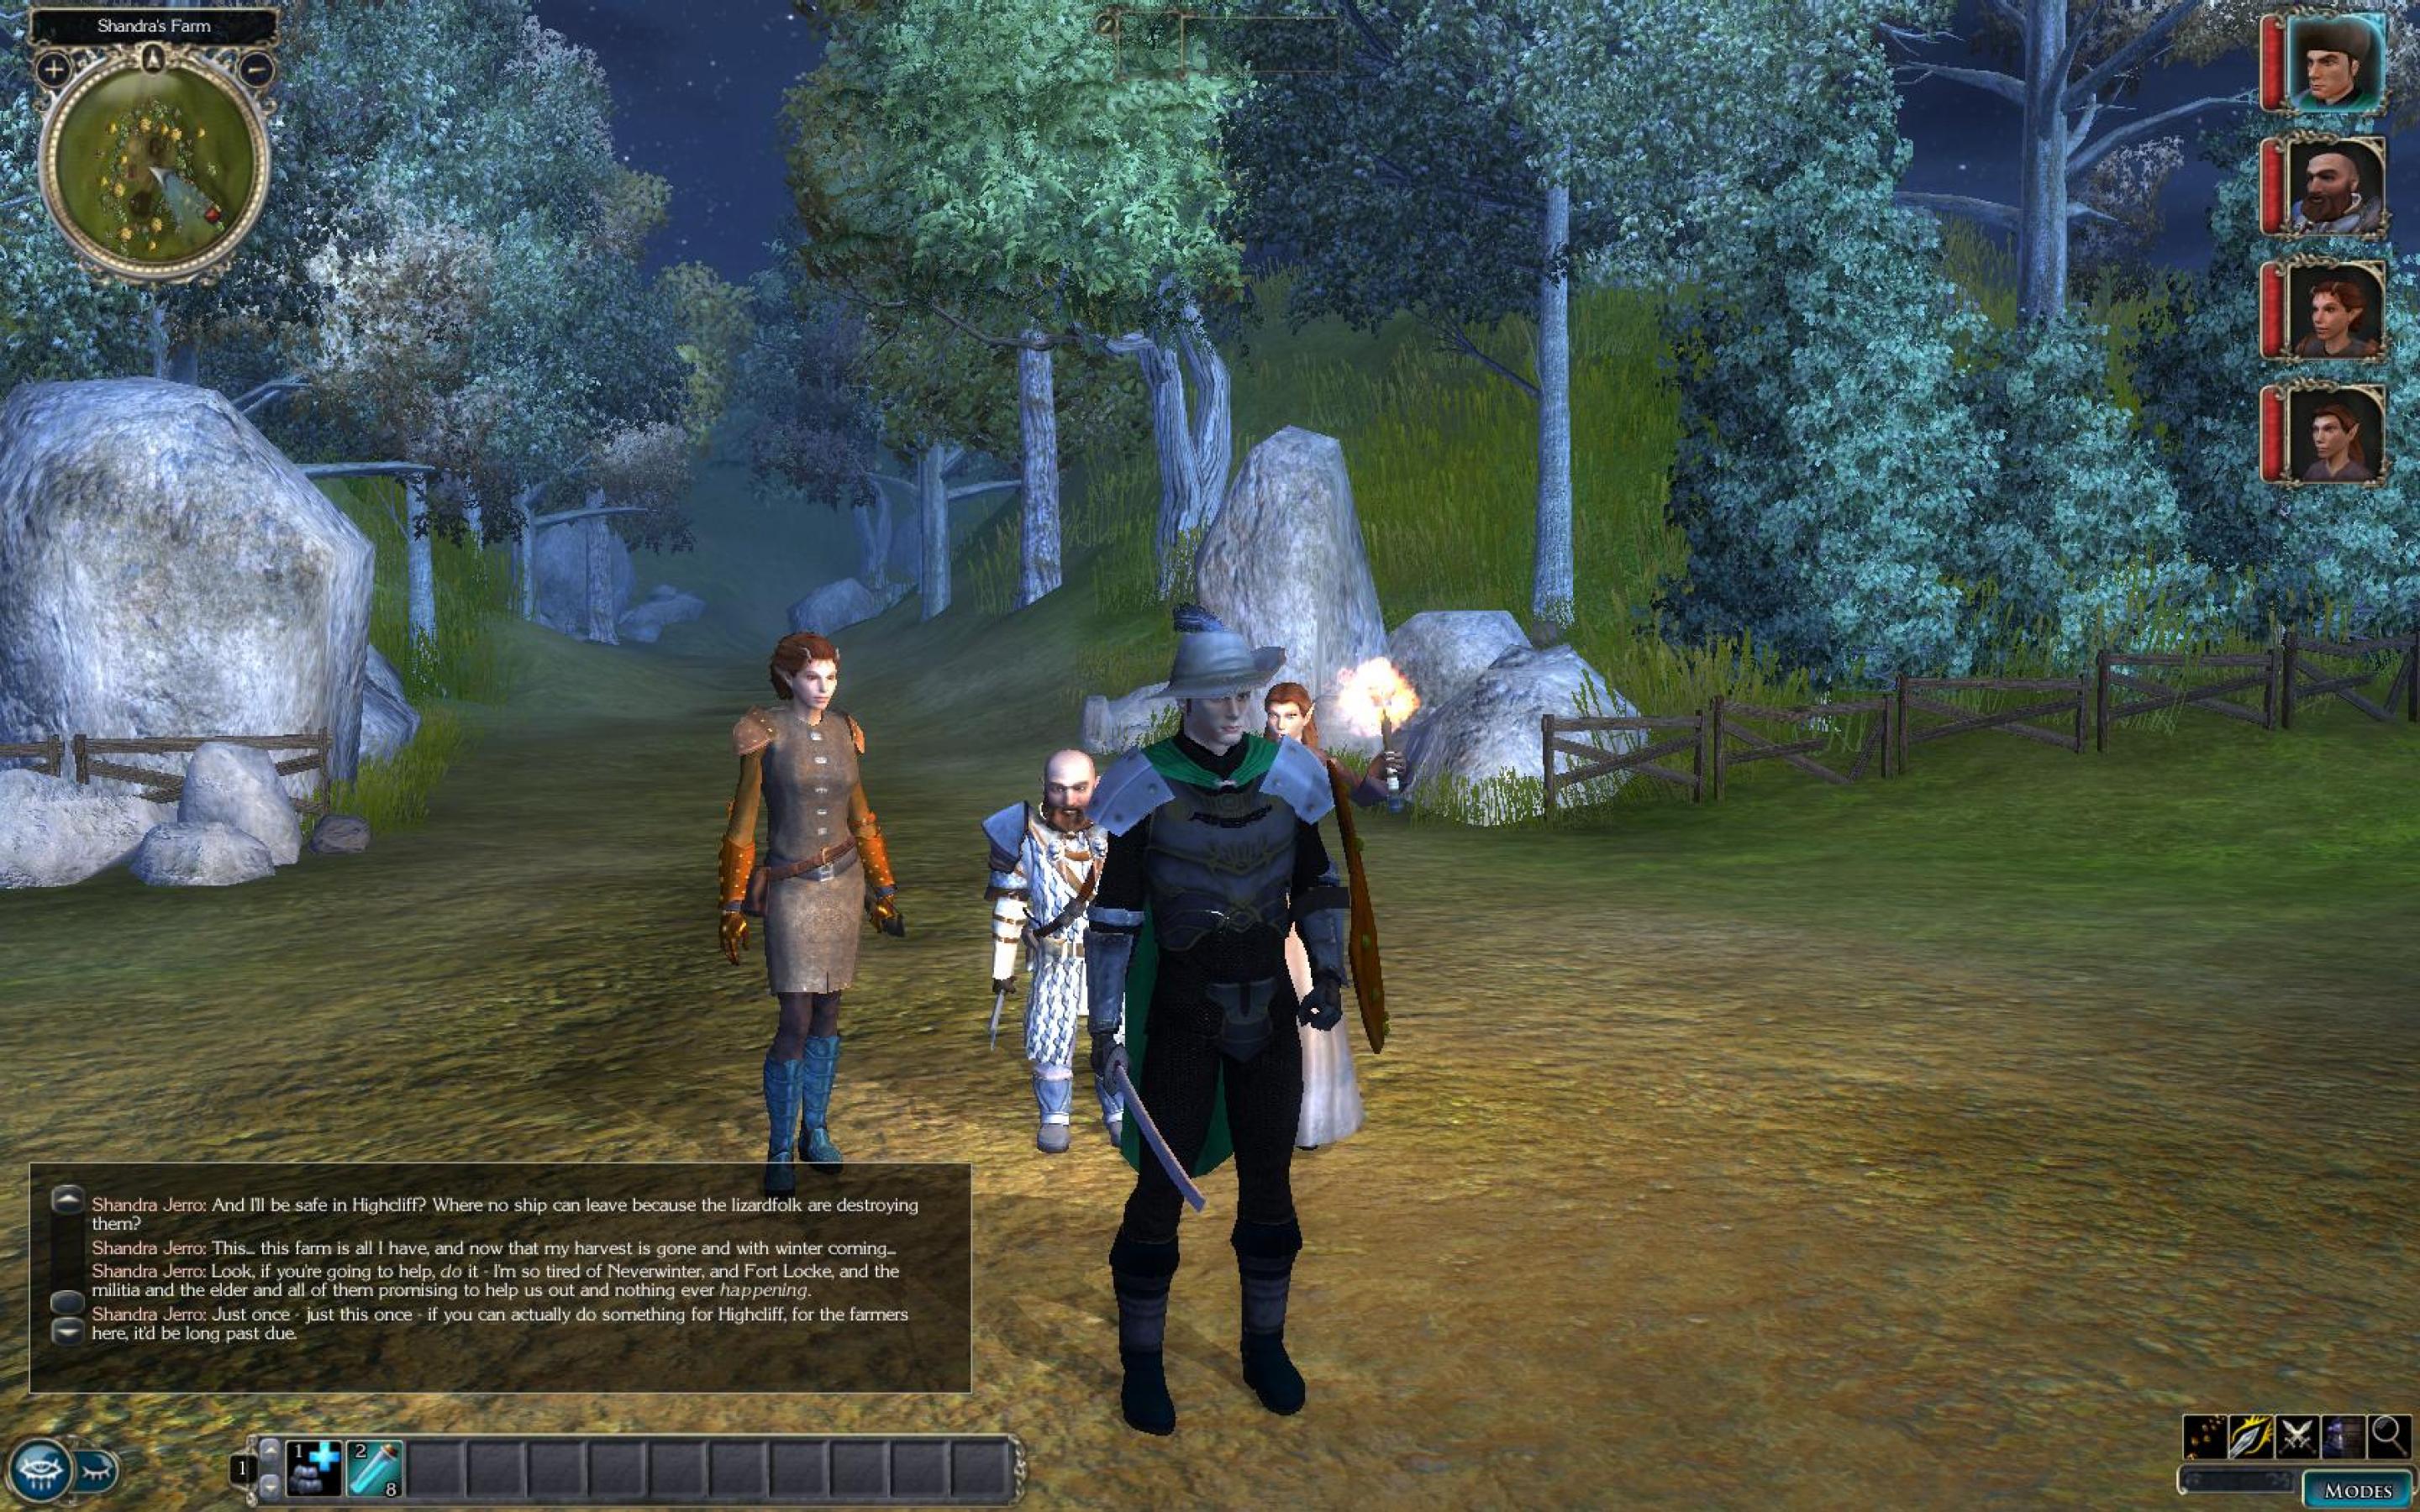 A gender ambiguous person holding a sword stands in front of three other people at the entrance to a dark forest.